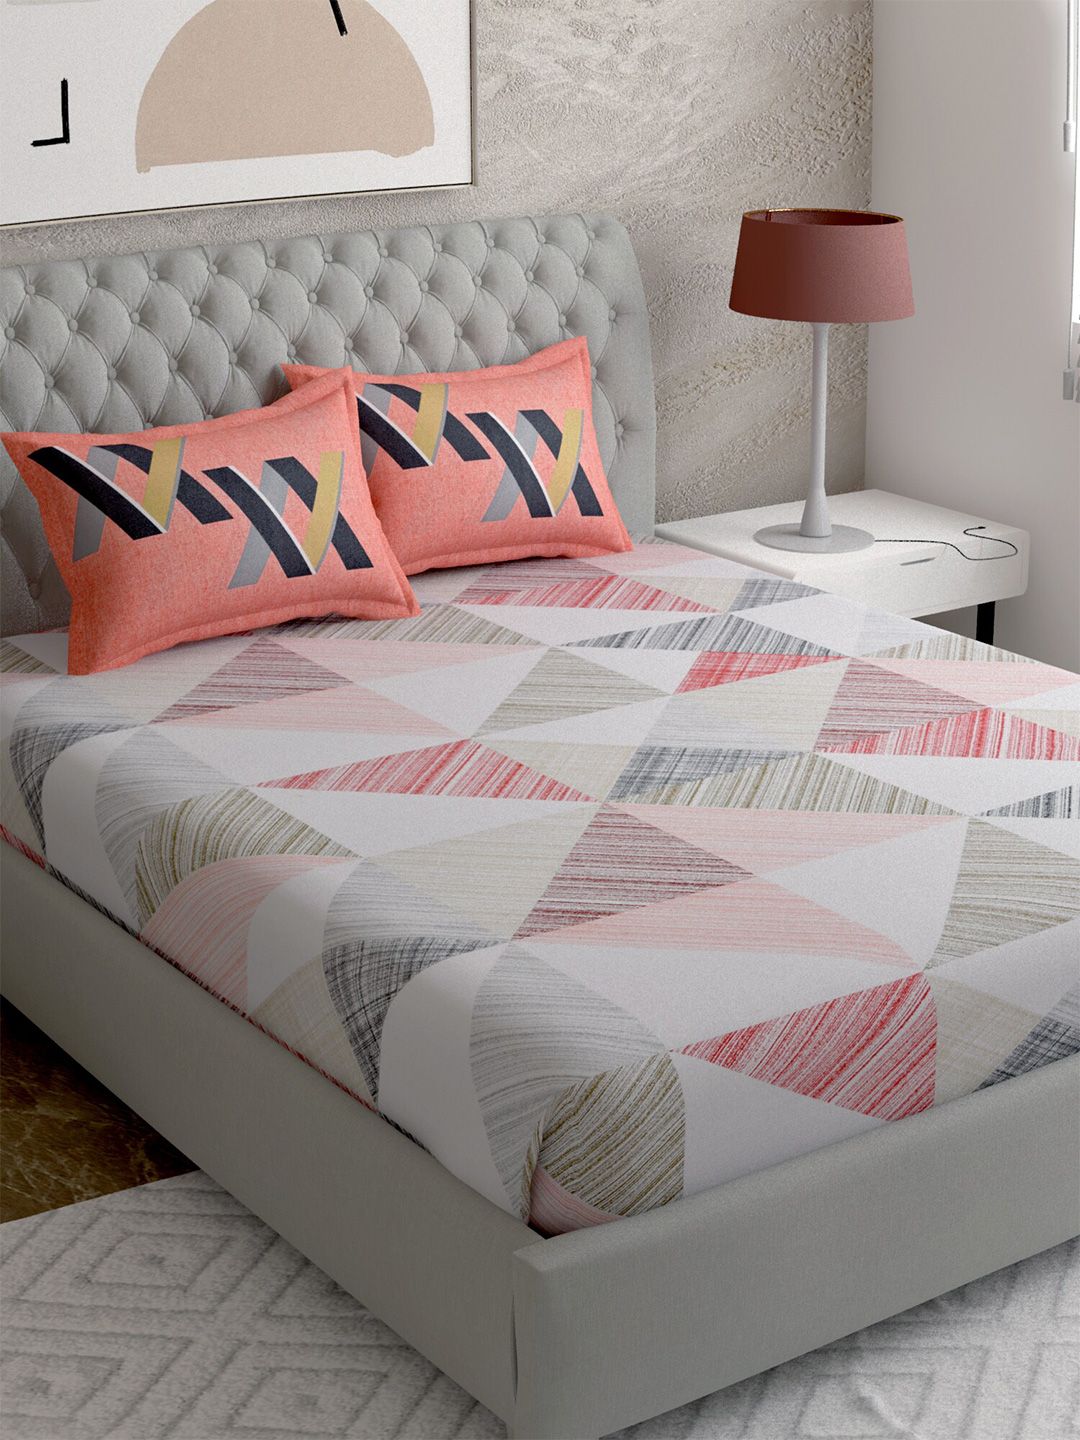 EverHOME Multicolour Geometric Printed 144 TC Queen Bedsheet with 2 Pillow Covers Price in India